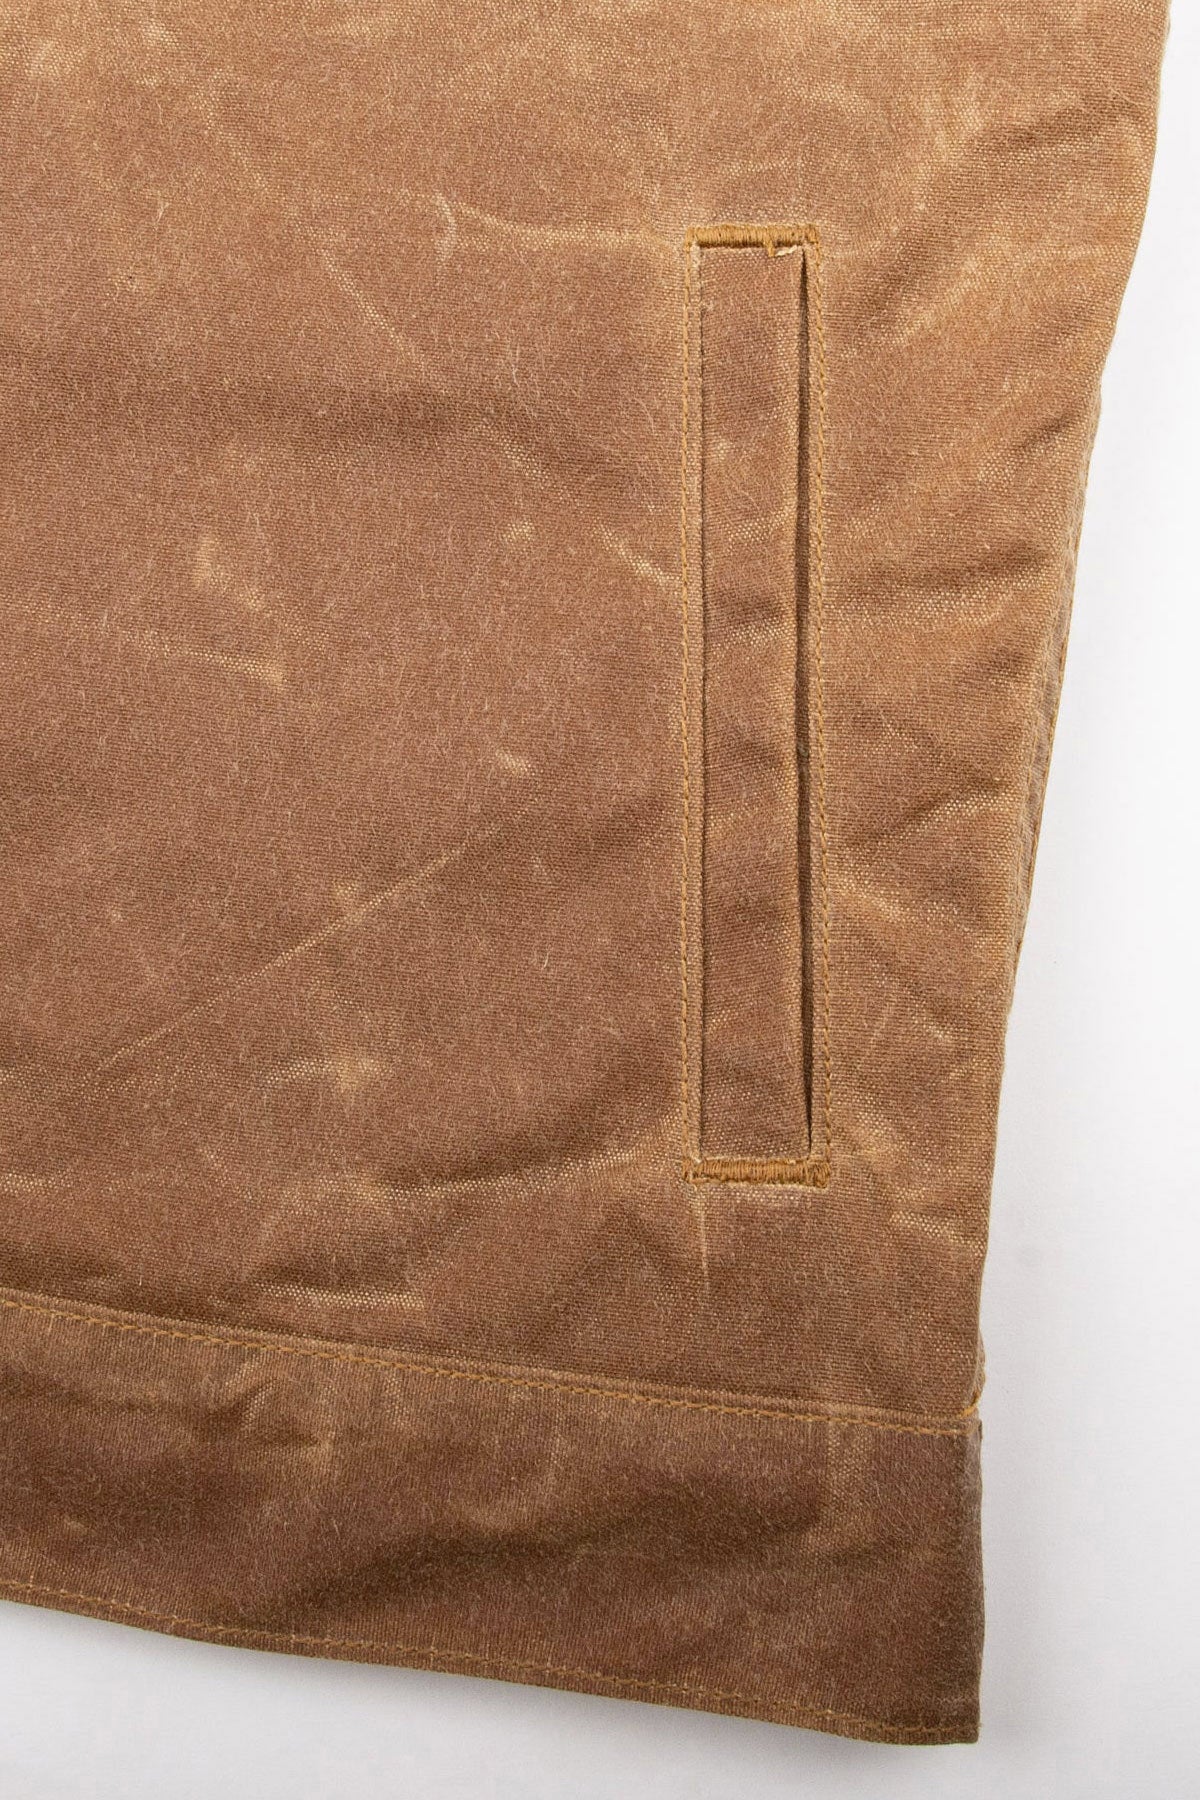 Freenote Cloth - Riders Jacket Waxed Canvas in Rust